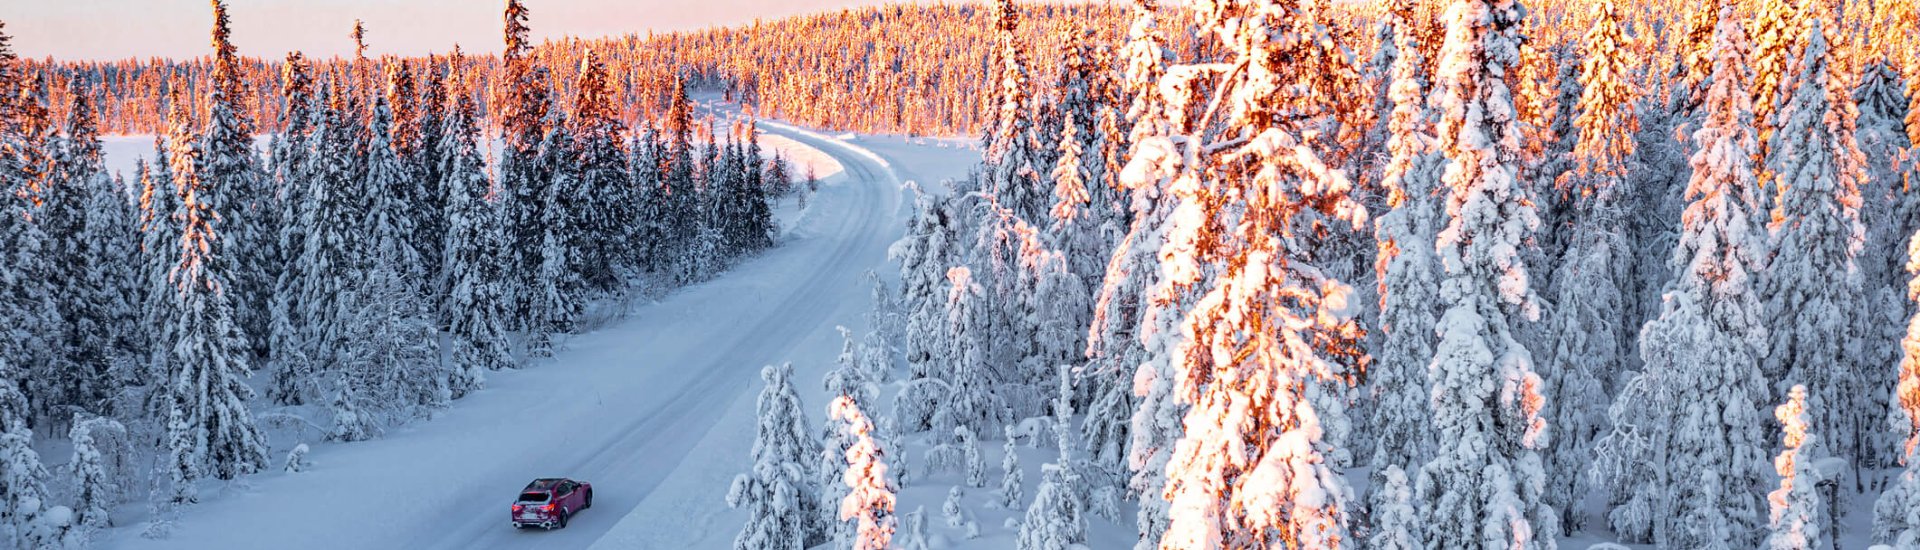 Follow the siren call of Lapland's snow-piled wilderness